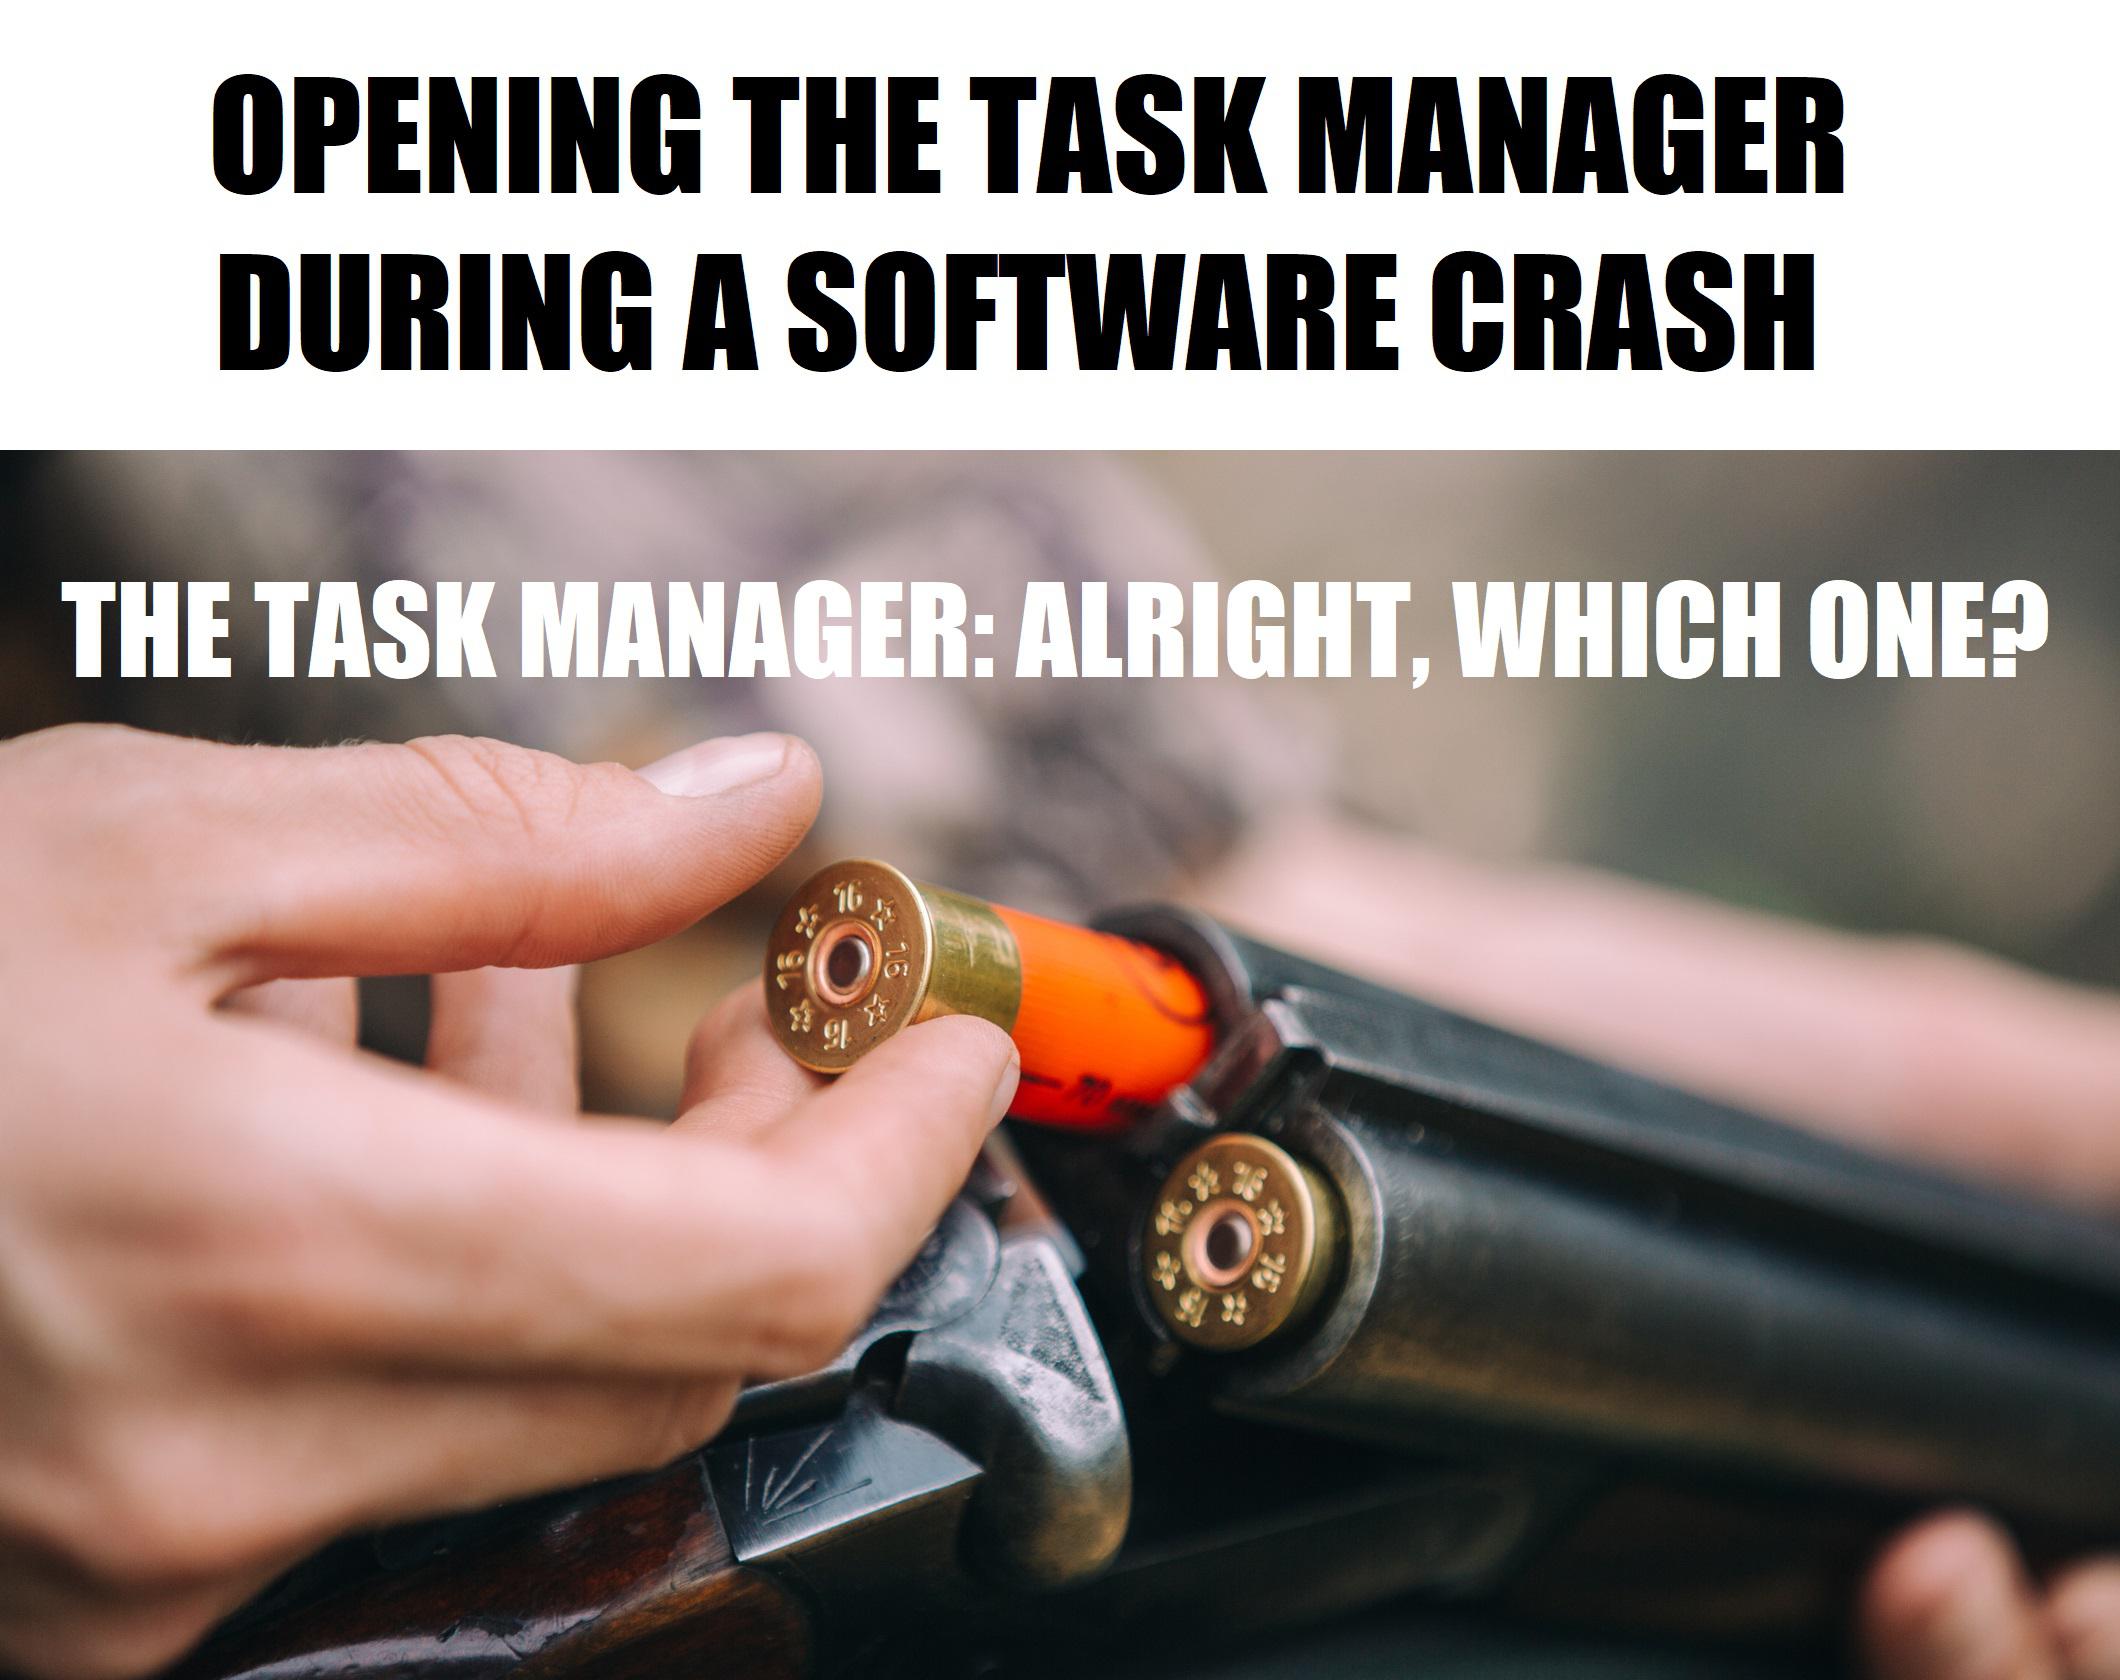 loaded shotgun - Opening The Task Manager During A Software Crash The Task Manager Alright, Which One? '16 o y o S22